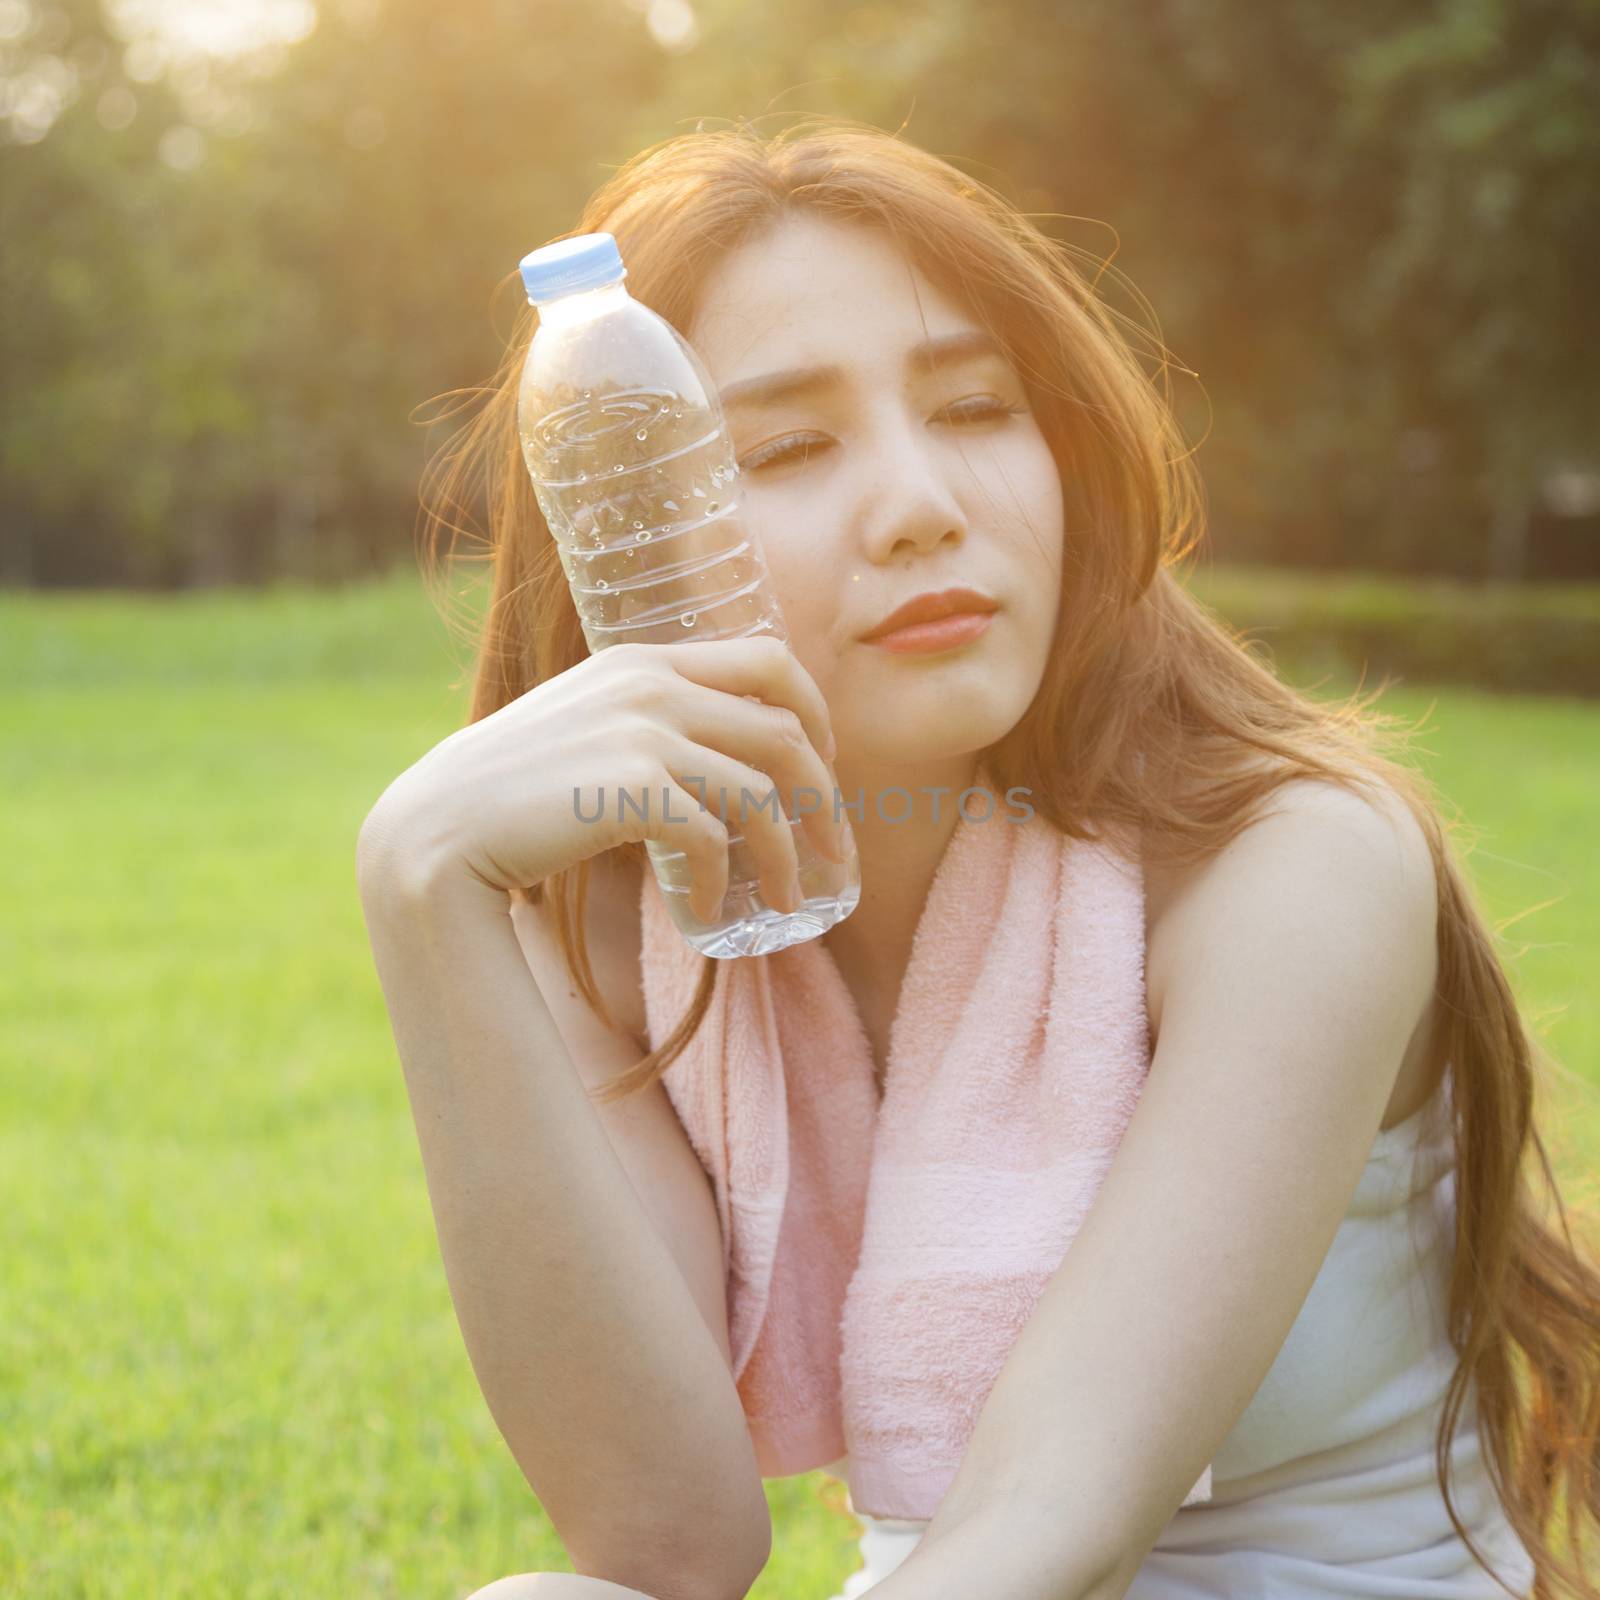 Woman Sitting and holding a bottle of water. Sitting on grass in the park after jogging. In the evening